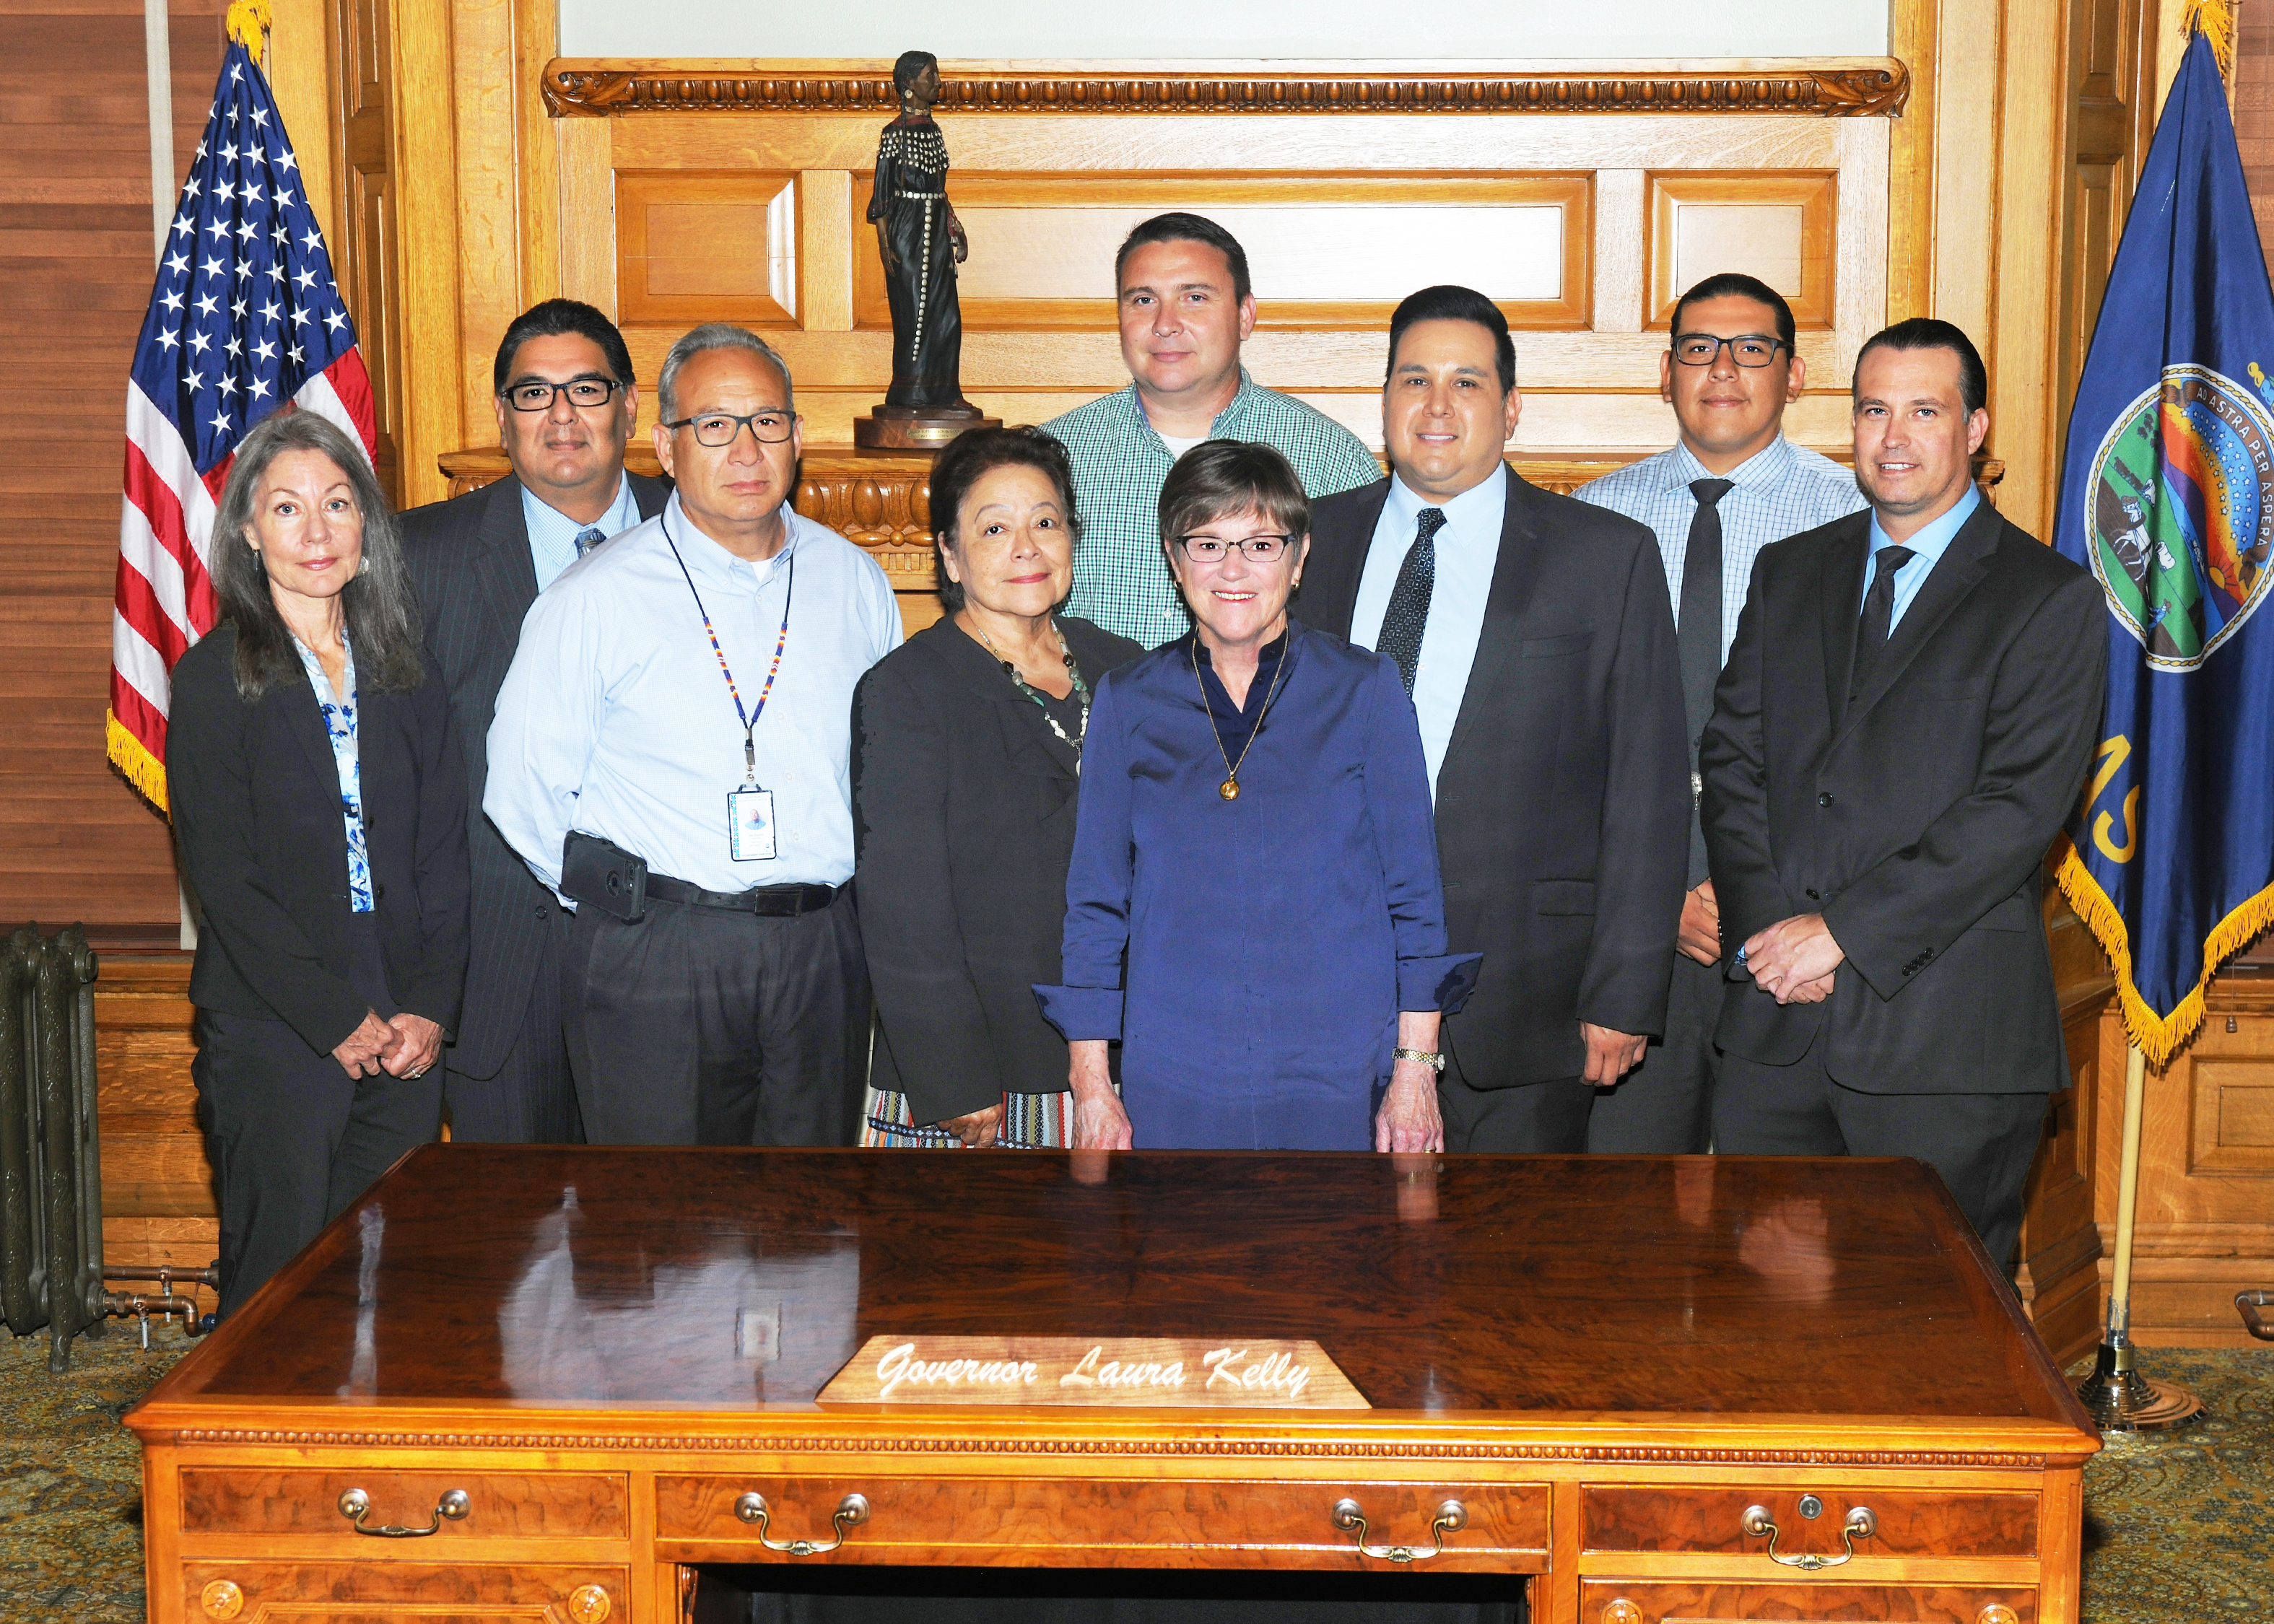 Photo of Governor Kelly meeting with members of the Prairie Band Potawatomi Tribal Council